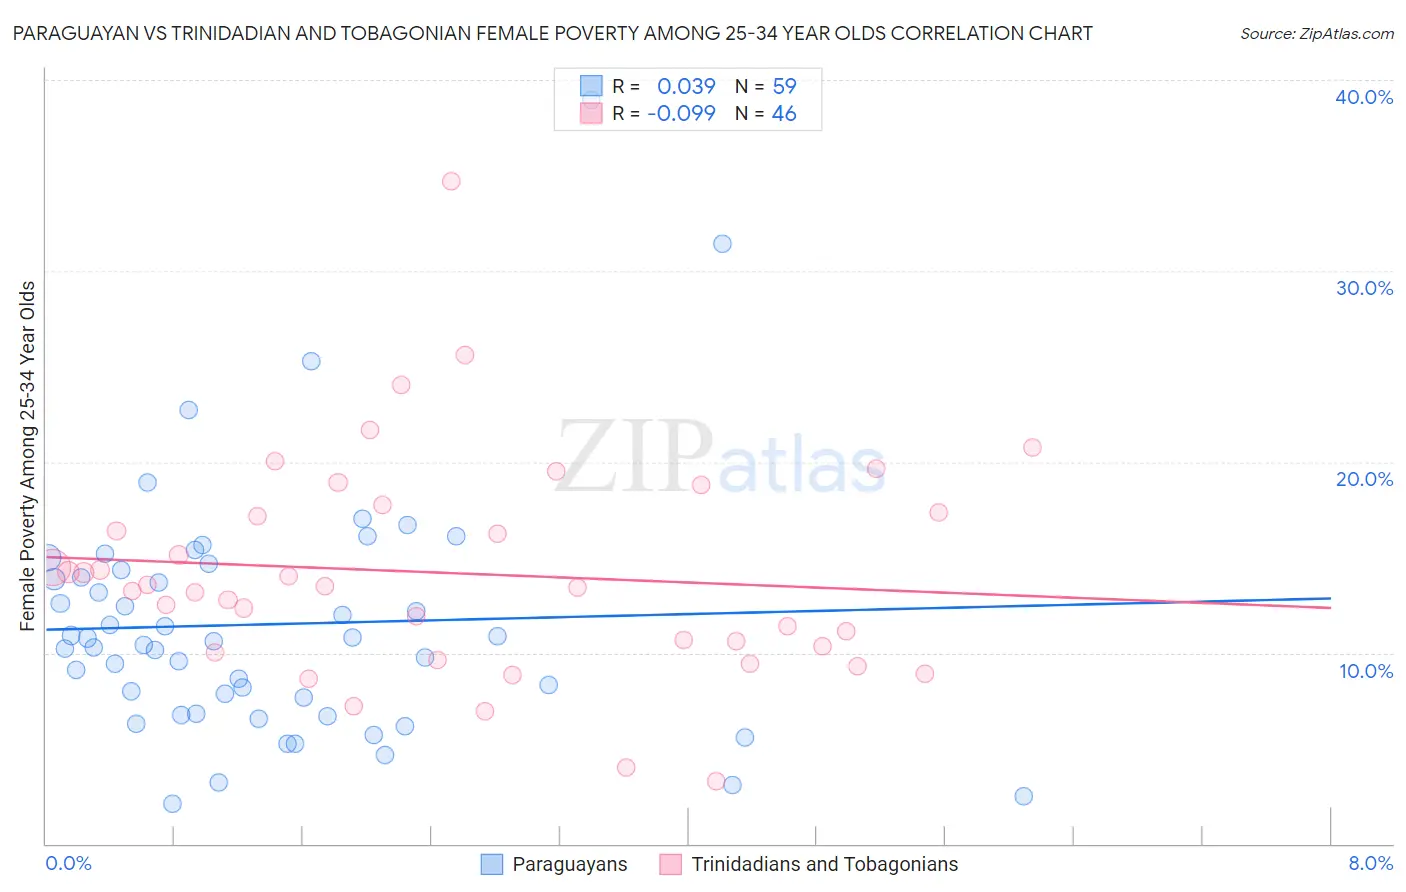 Paraguayan vs Trinidadian and Tobagonian Female Poverty Among 25-34 Year Olds